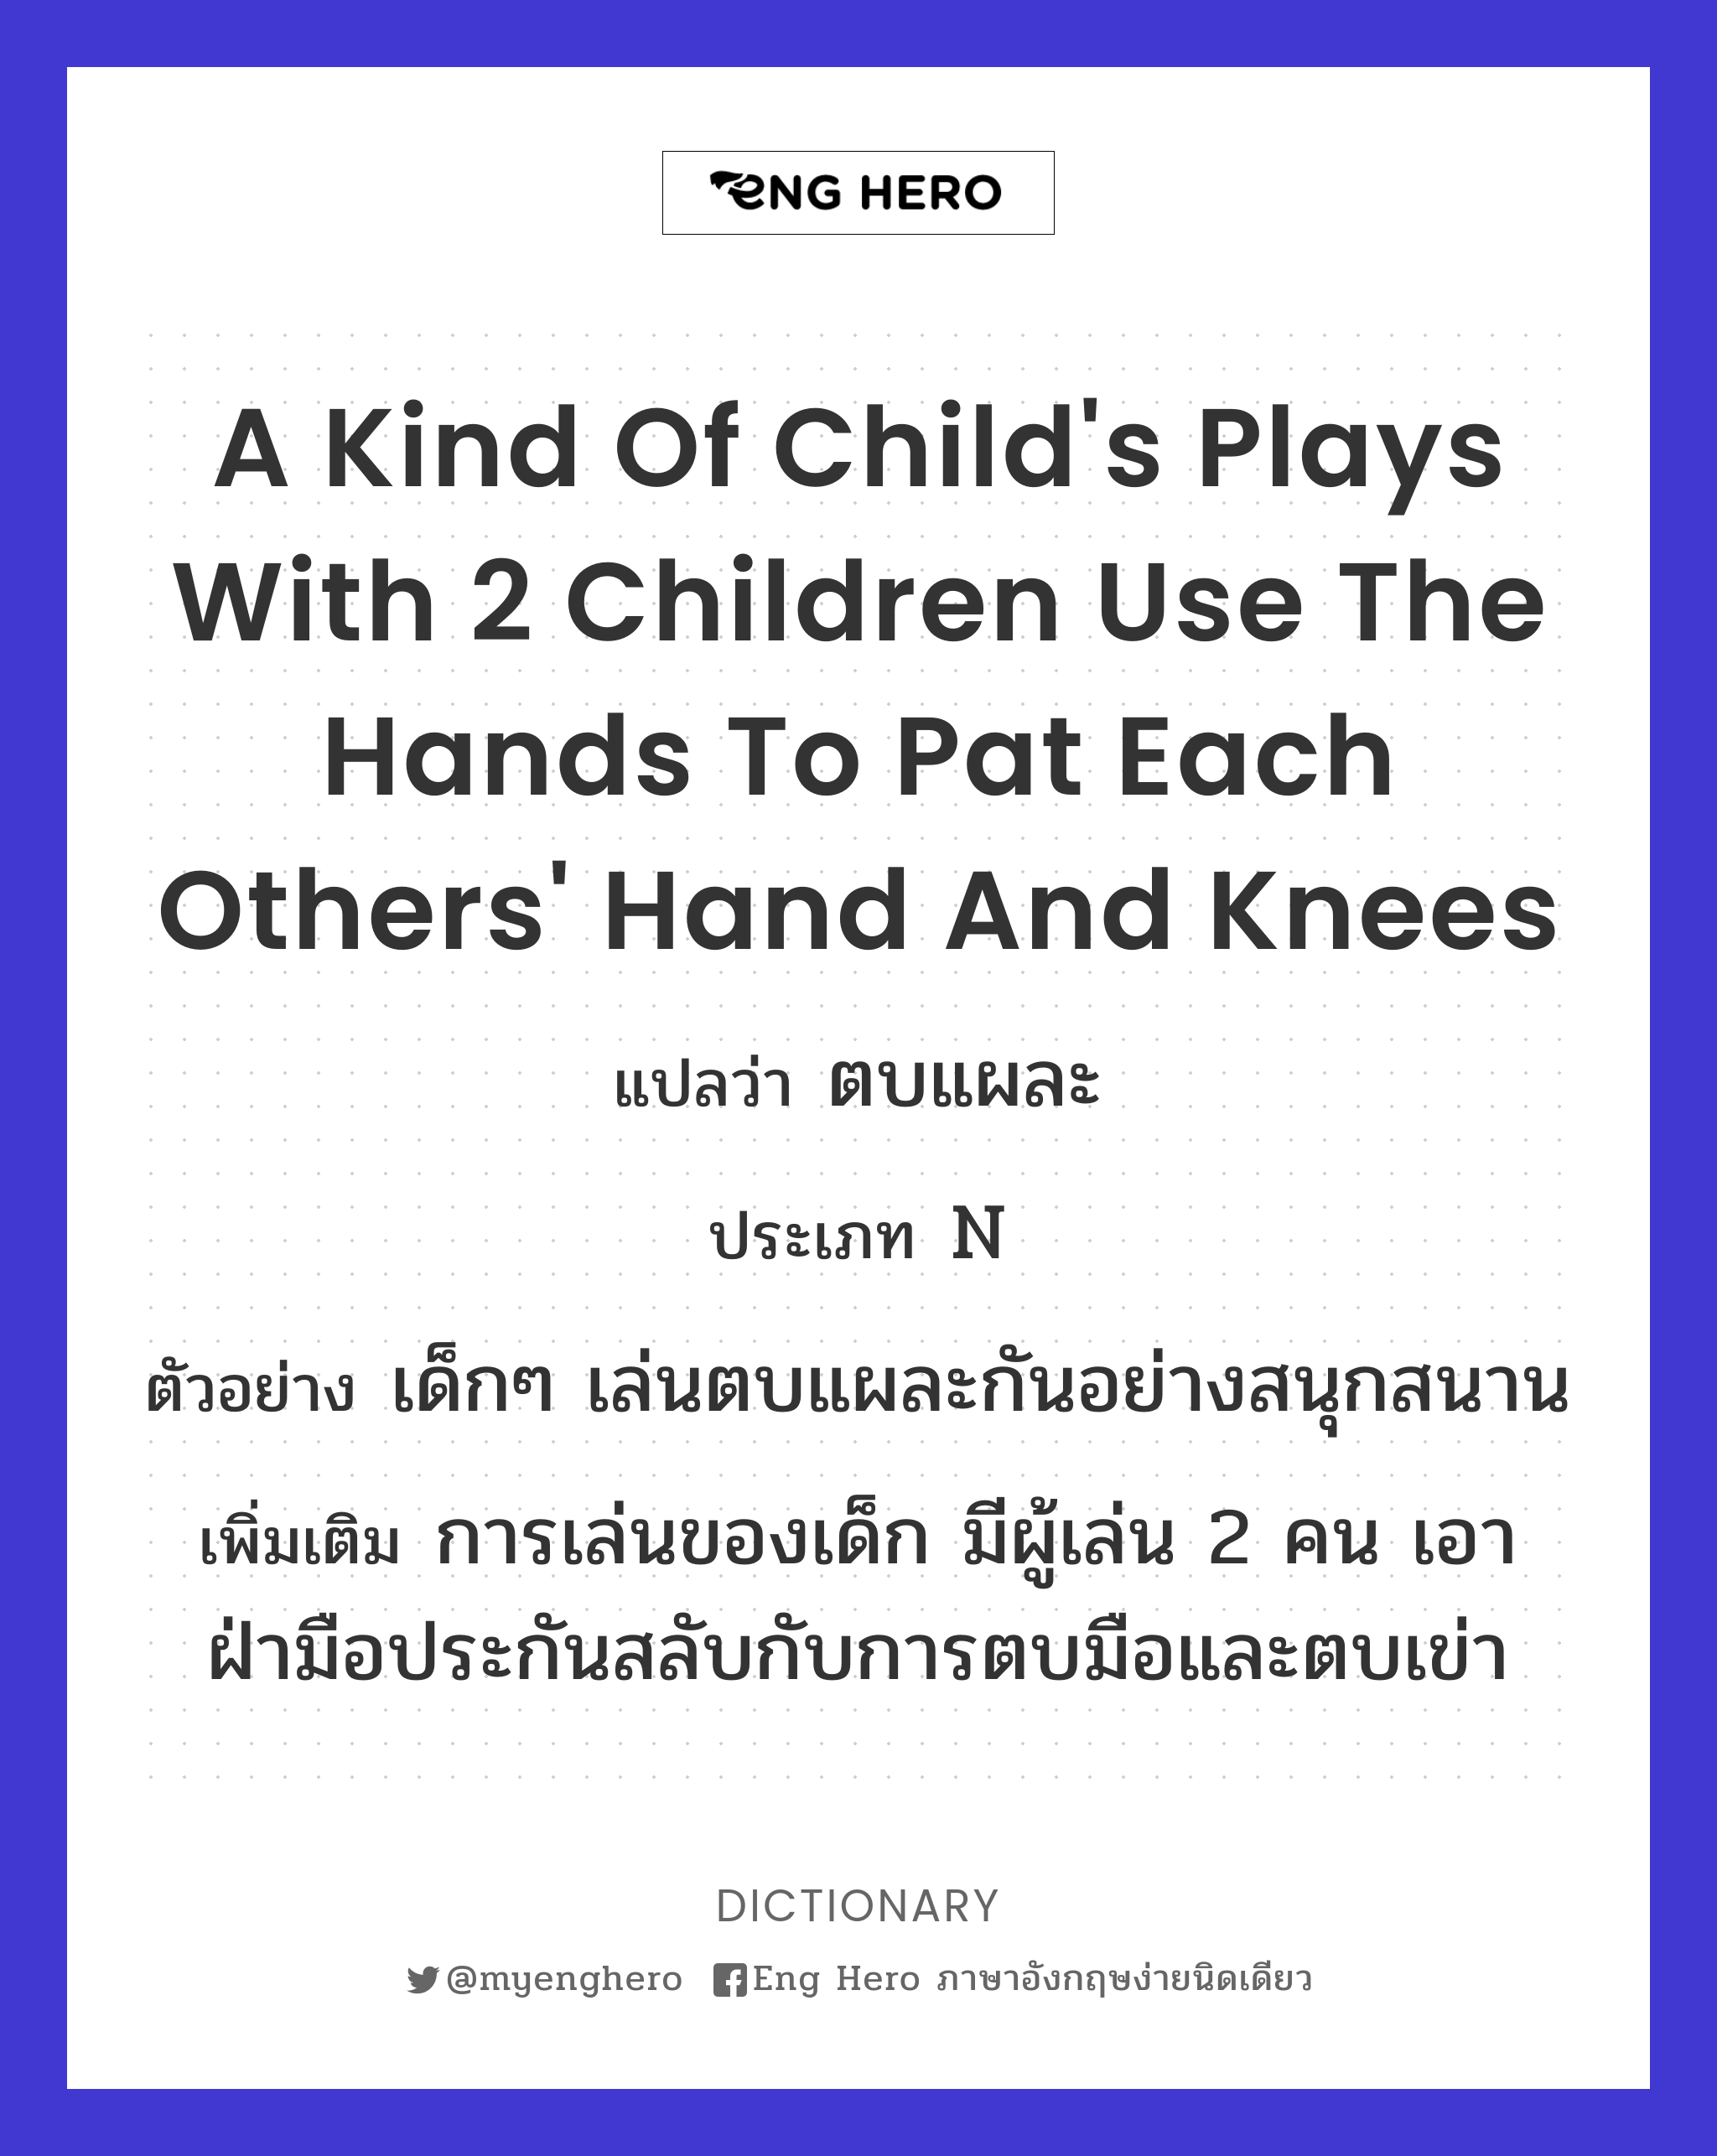 a kind of child's plays with 2 children use the hands to pat each others' hand and knees